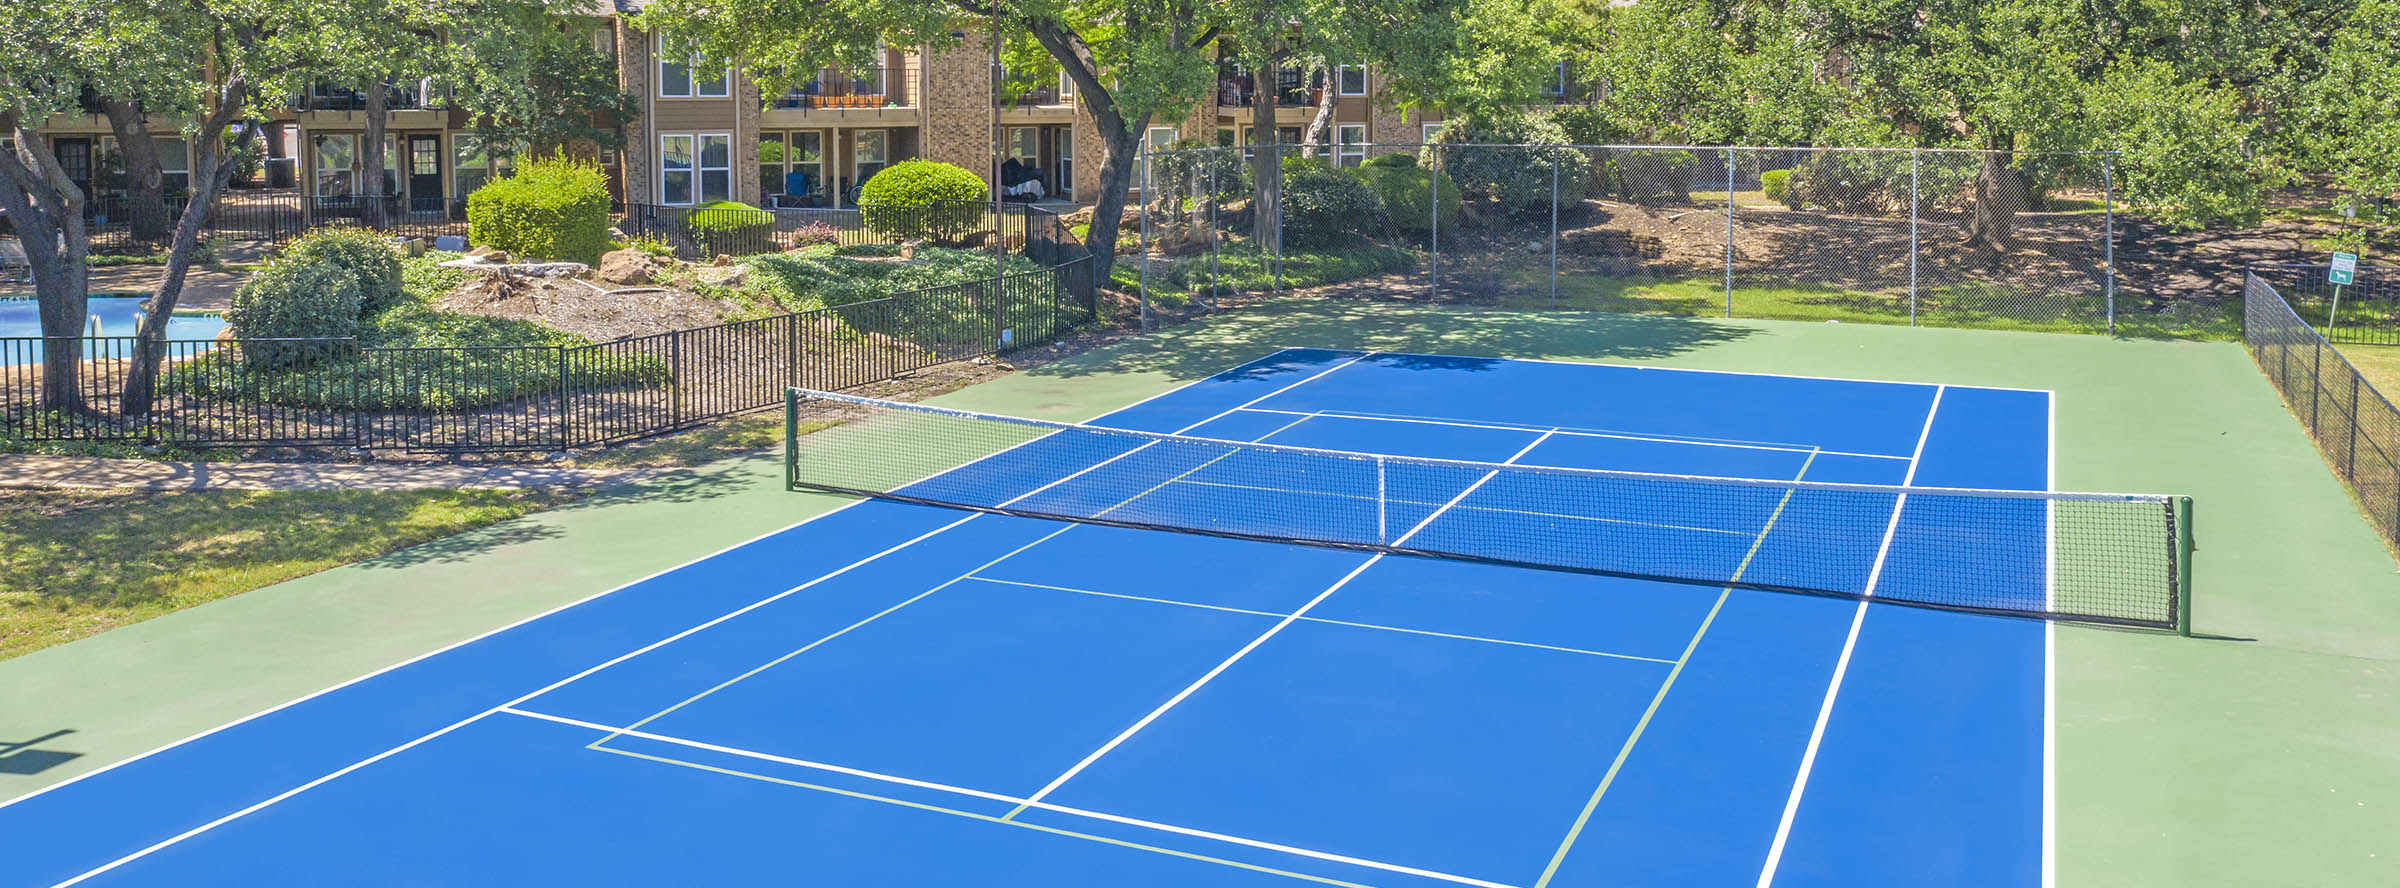 Well-maintained tennis/ pickleball court.